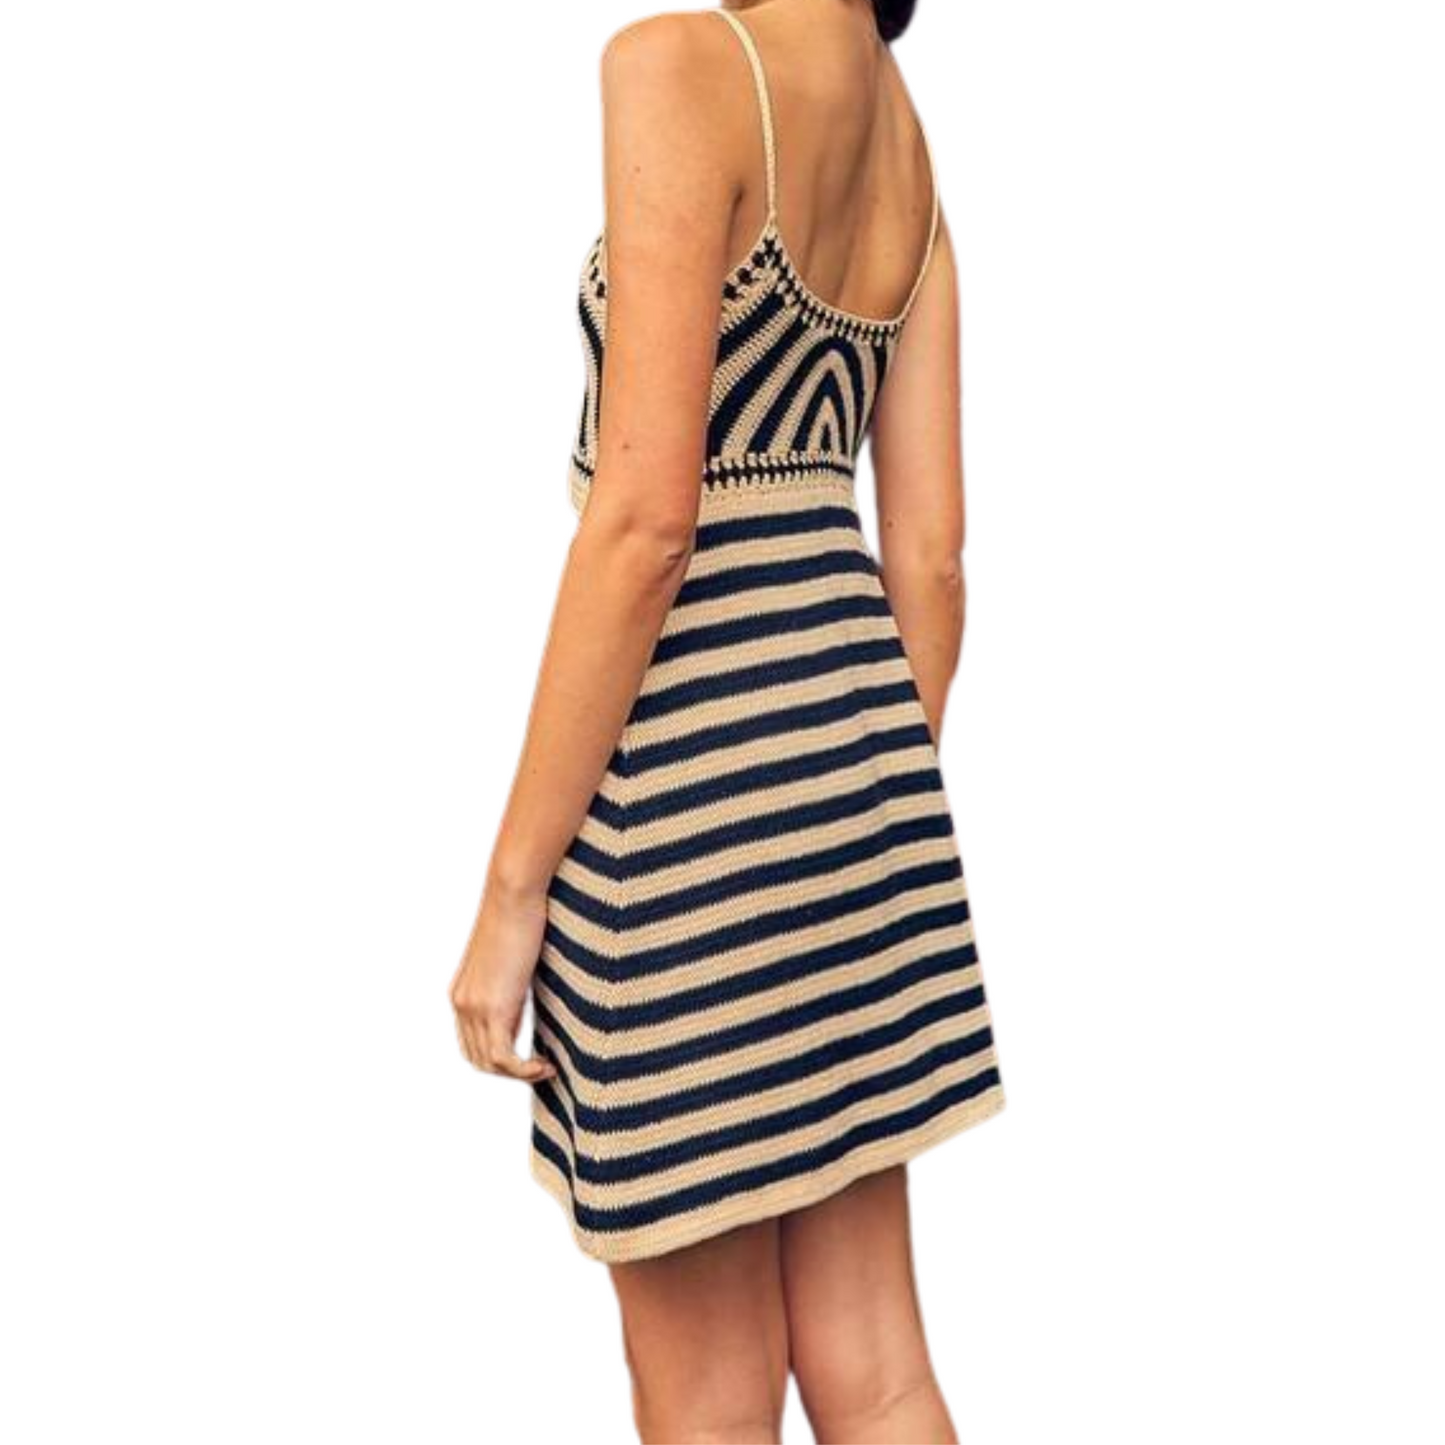 Black and tan striped crochet dress, worn by a woman from the back.